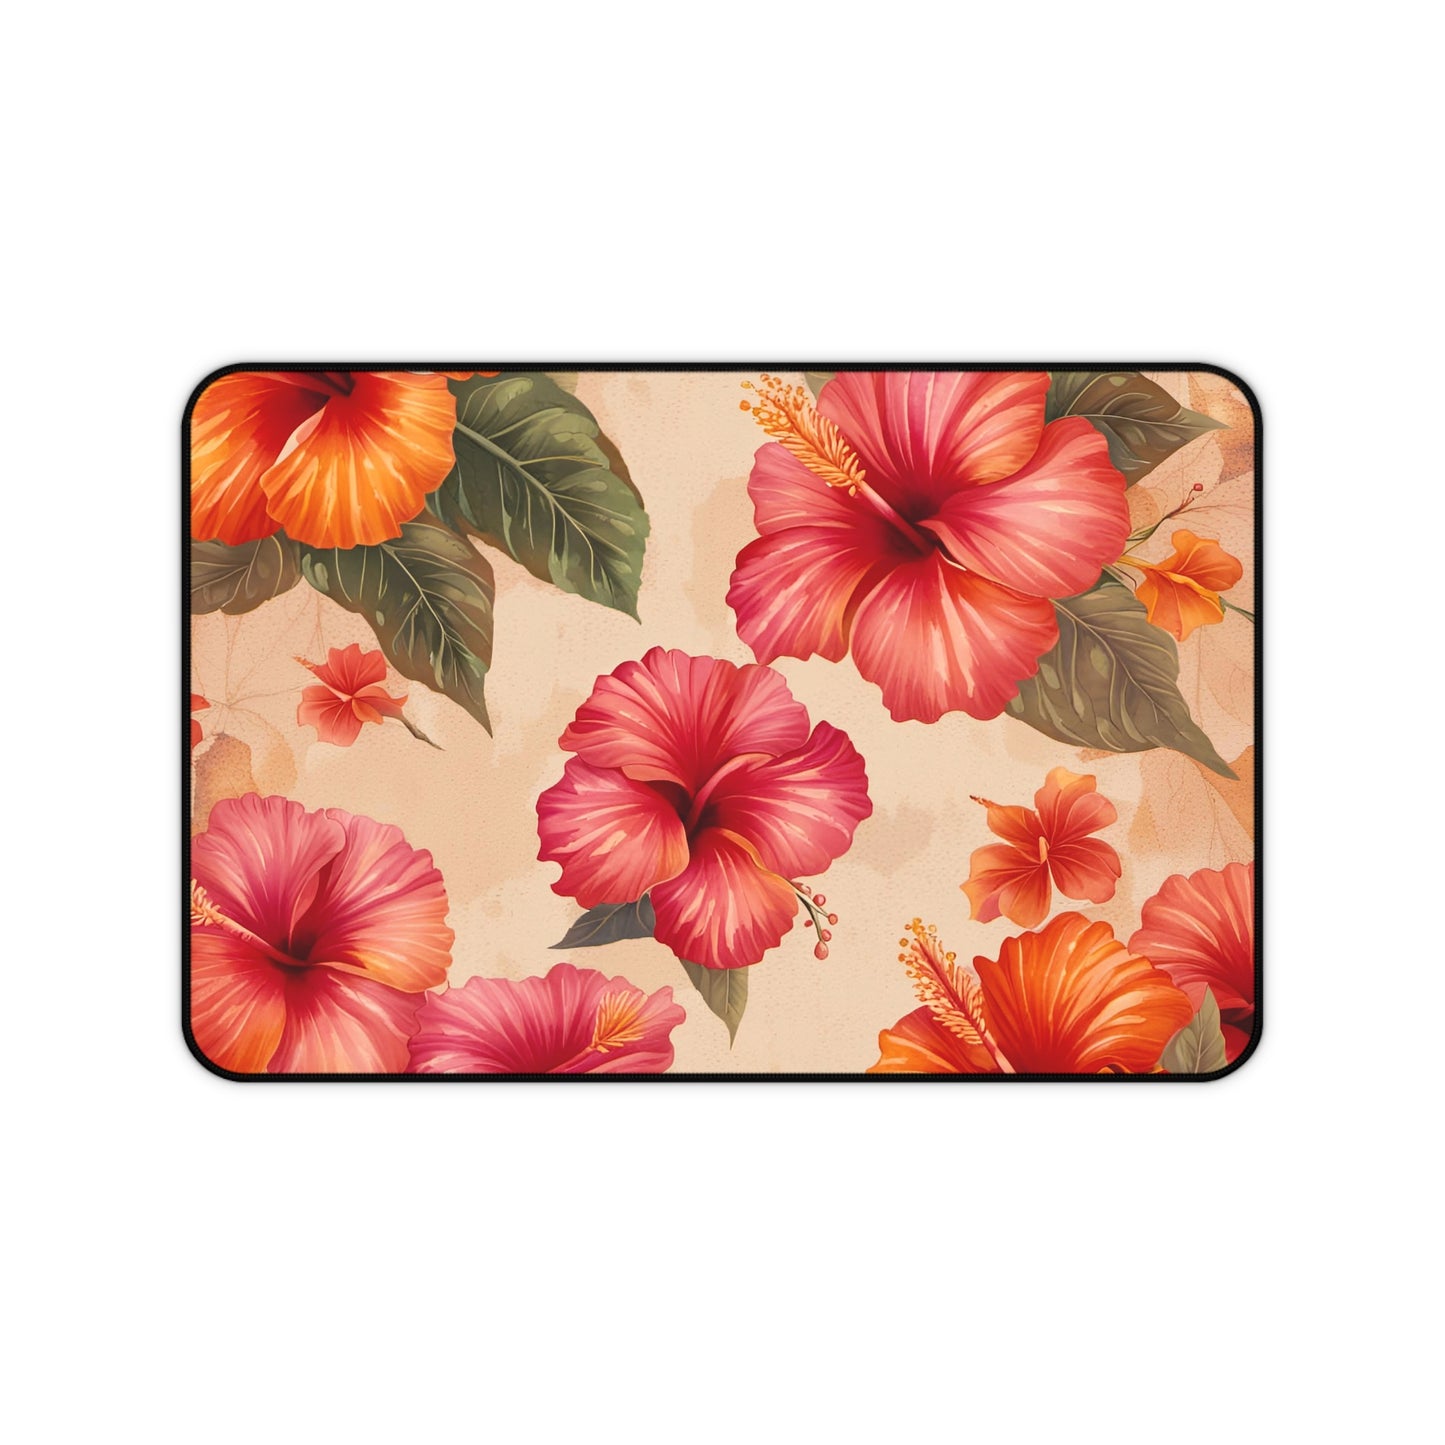 Hibiscus Flowers on Distressed Background Printed on Desk mat 12x18